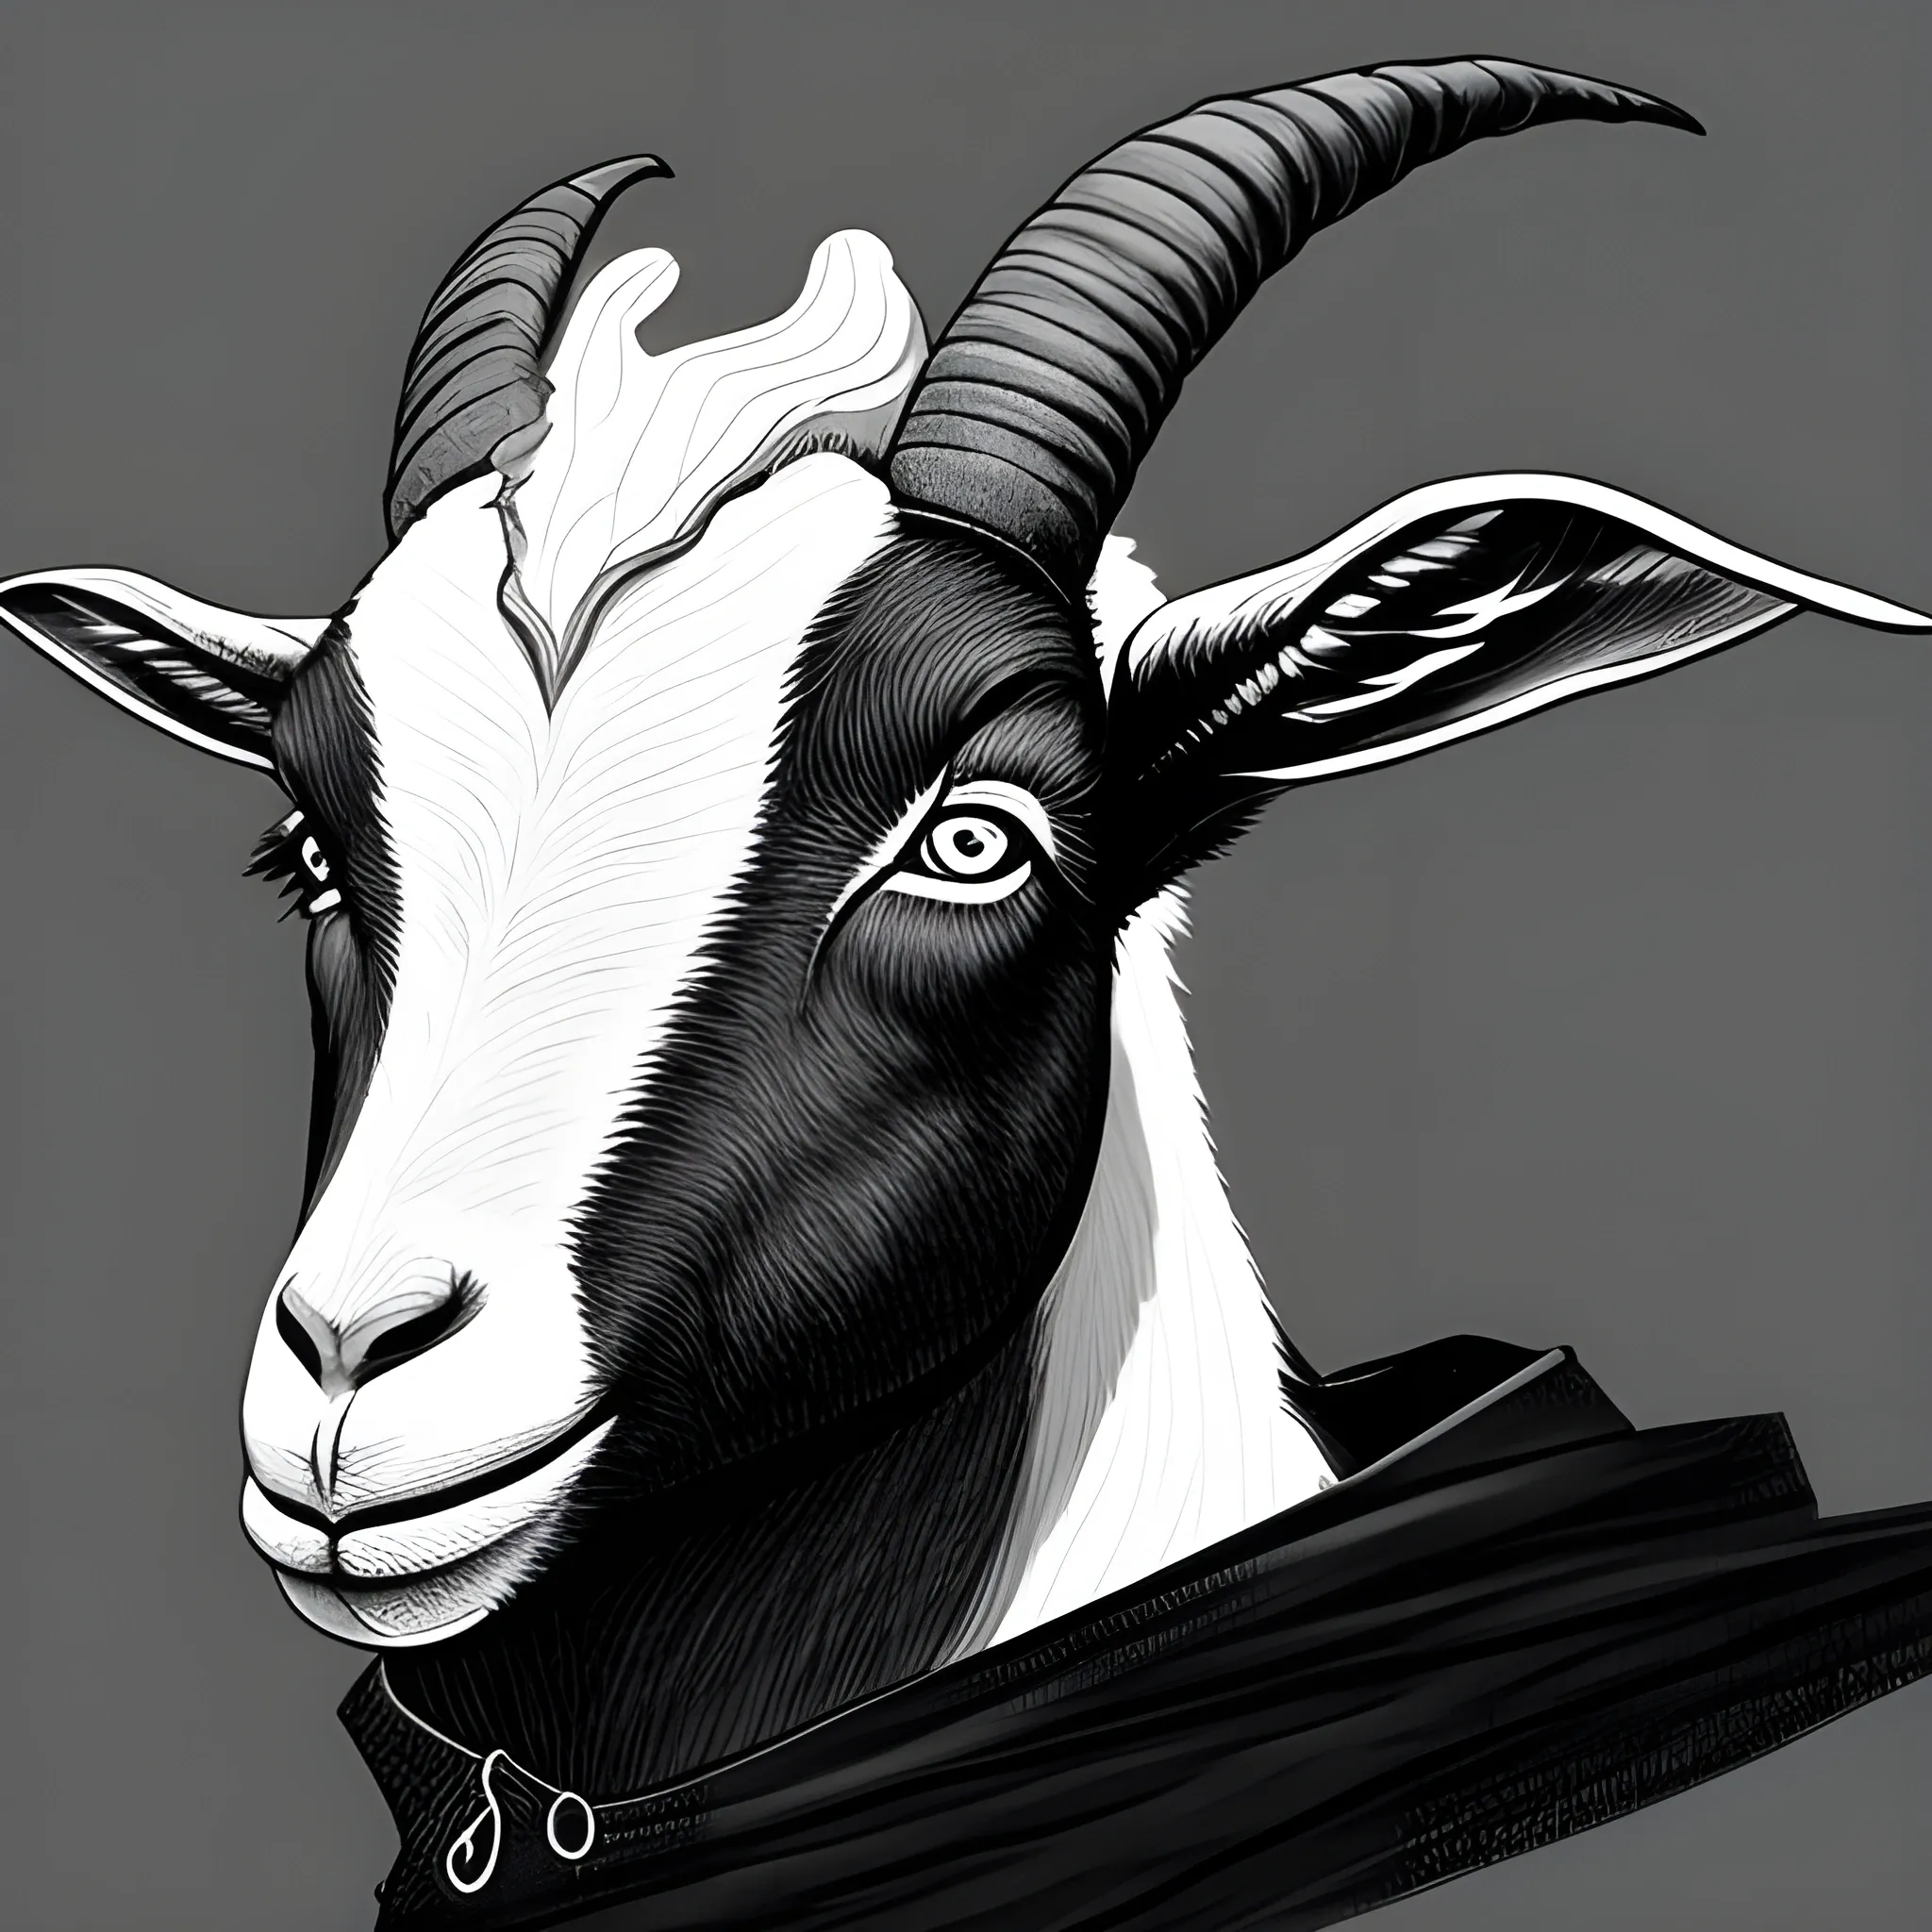 A line art drawing of a goat's face under a black cloak, with smoke blowing from its nostrils, high detail digital art